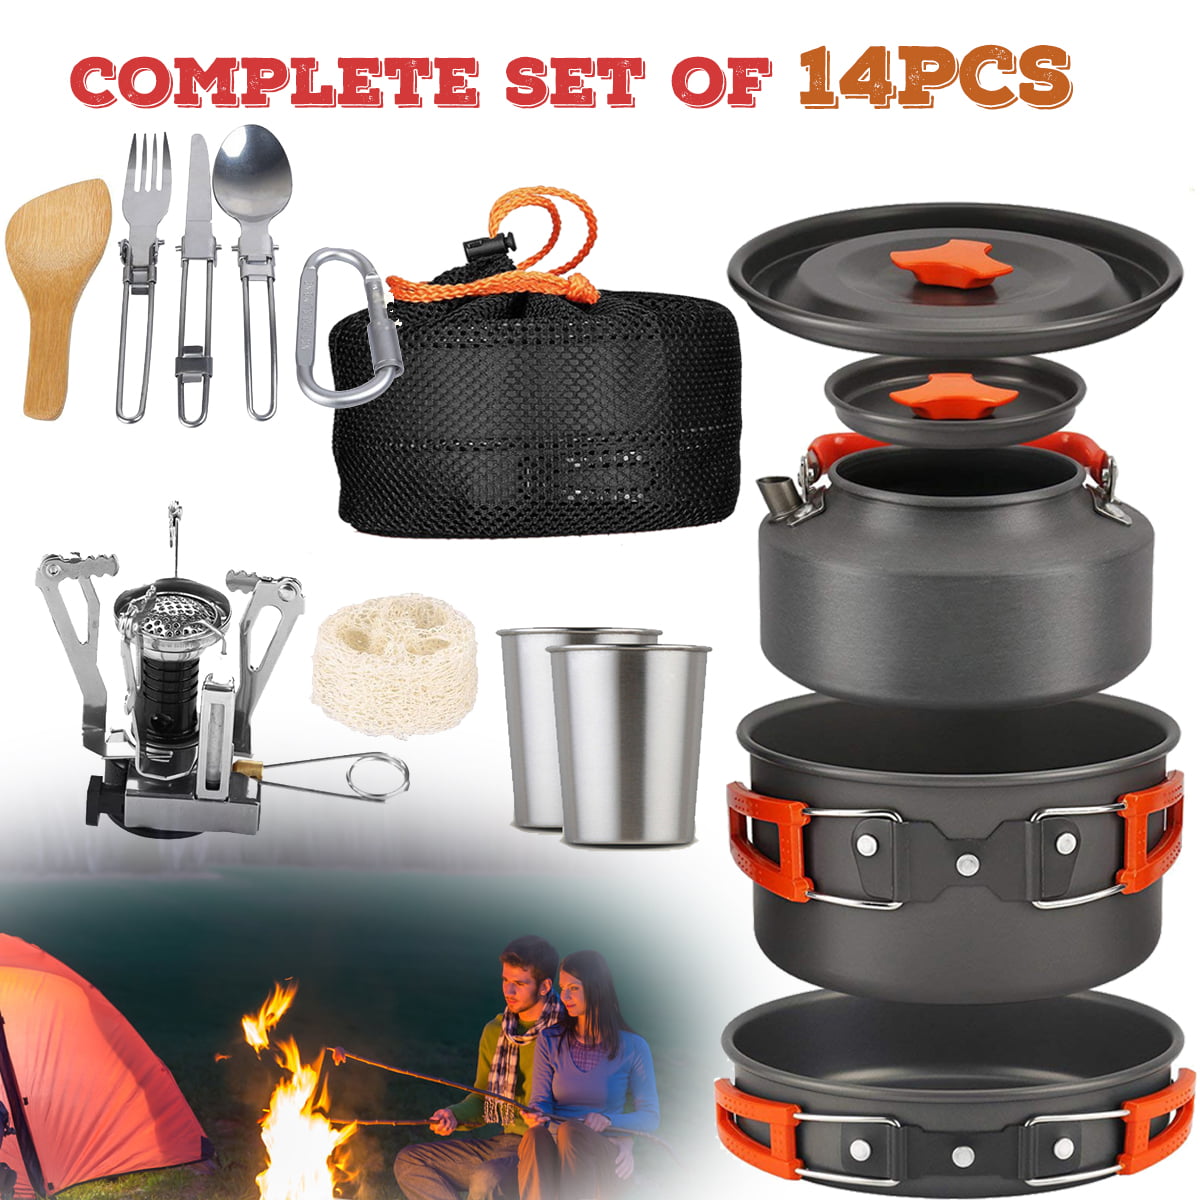 Saiko 13 pcs Camping Cookware Kit,Outdoor Cooking Set Non Stick Camping Pans and Pots Lightweight Campfire Bowl Pot Pan Gas Stove Backpacking Gear for Hiking BBQ Picnic Hiking Fishing